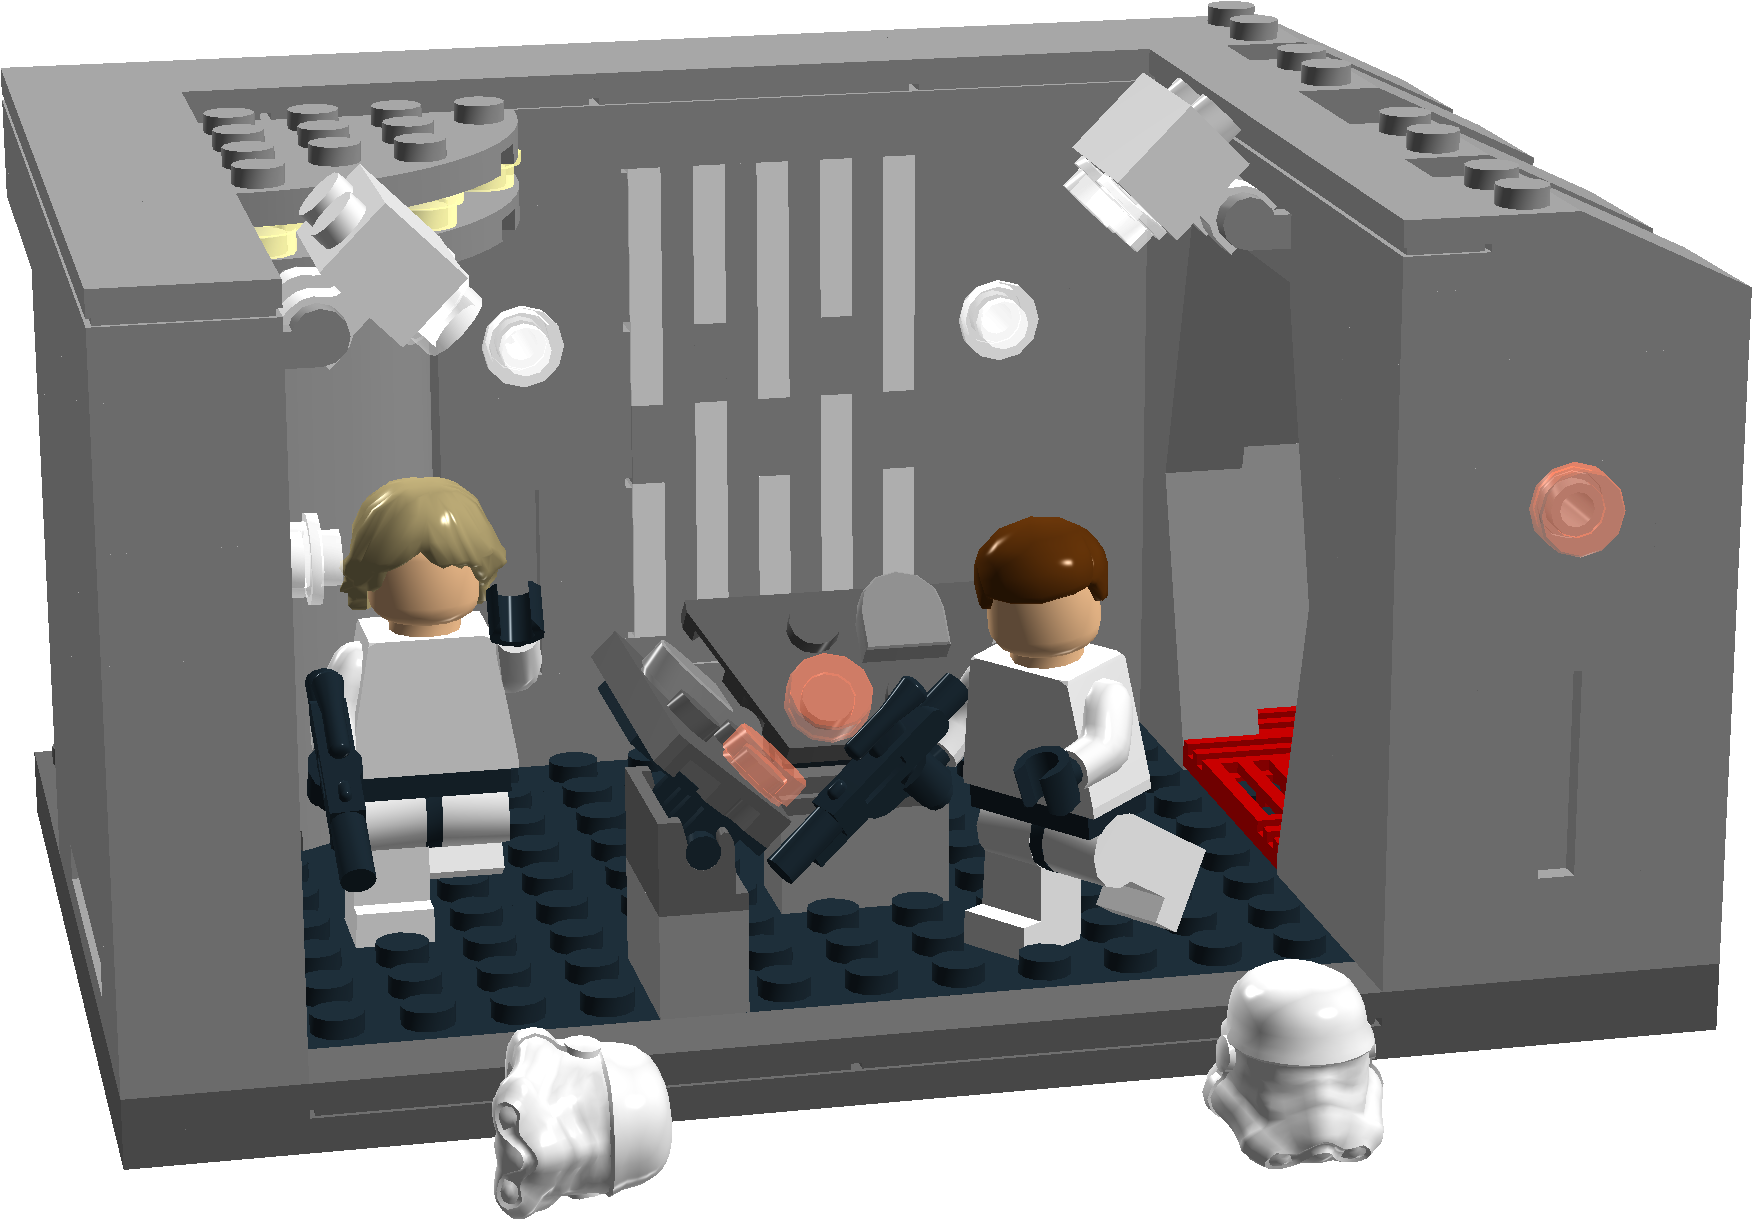 Lego Star Wars Detention Block Rescue - Play (2320x1219)